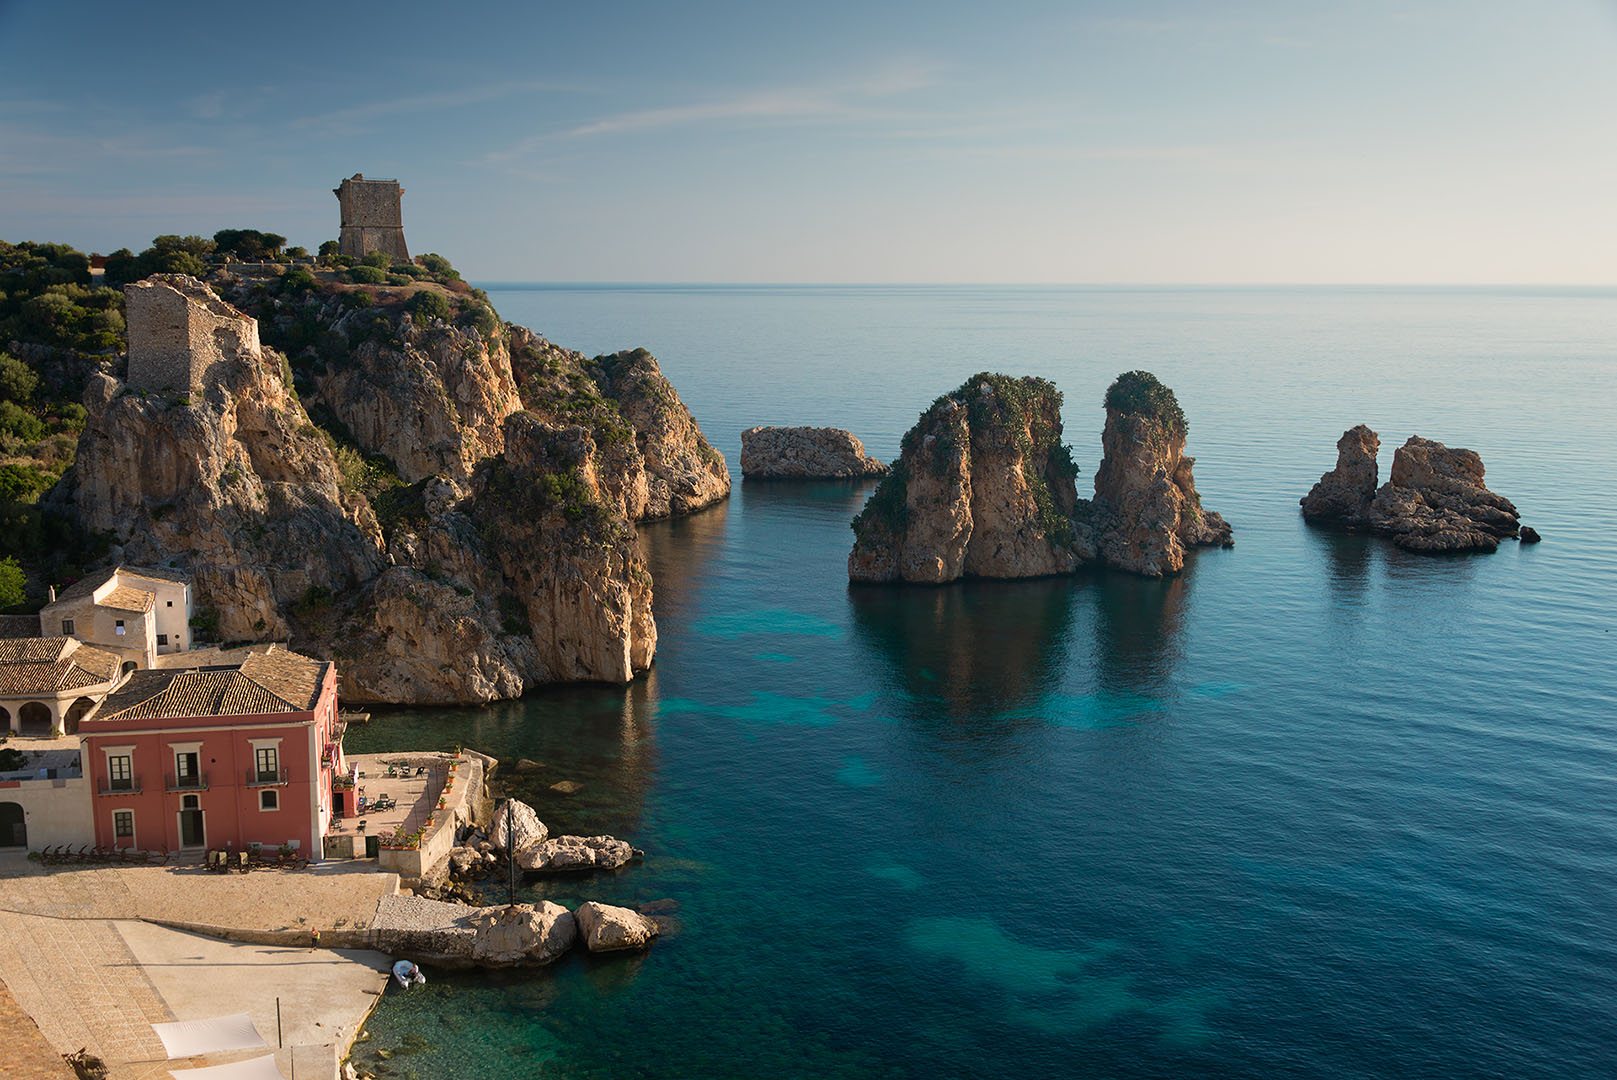 The I Faraglioni rocks in the Mediterranean Sea and the old red Tonnara building in the early morning sunlight in the town of Scopello, at the foot of the Lo Zingaro Nature Reserve at the northern coast of the island of Sicily, Italy.